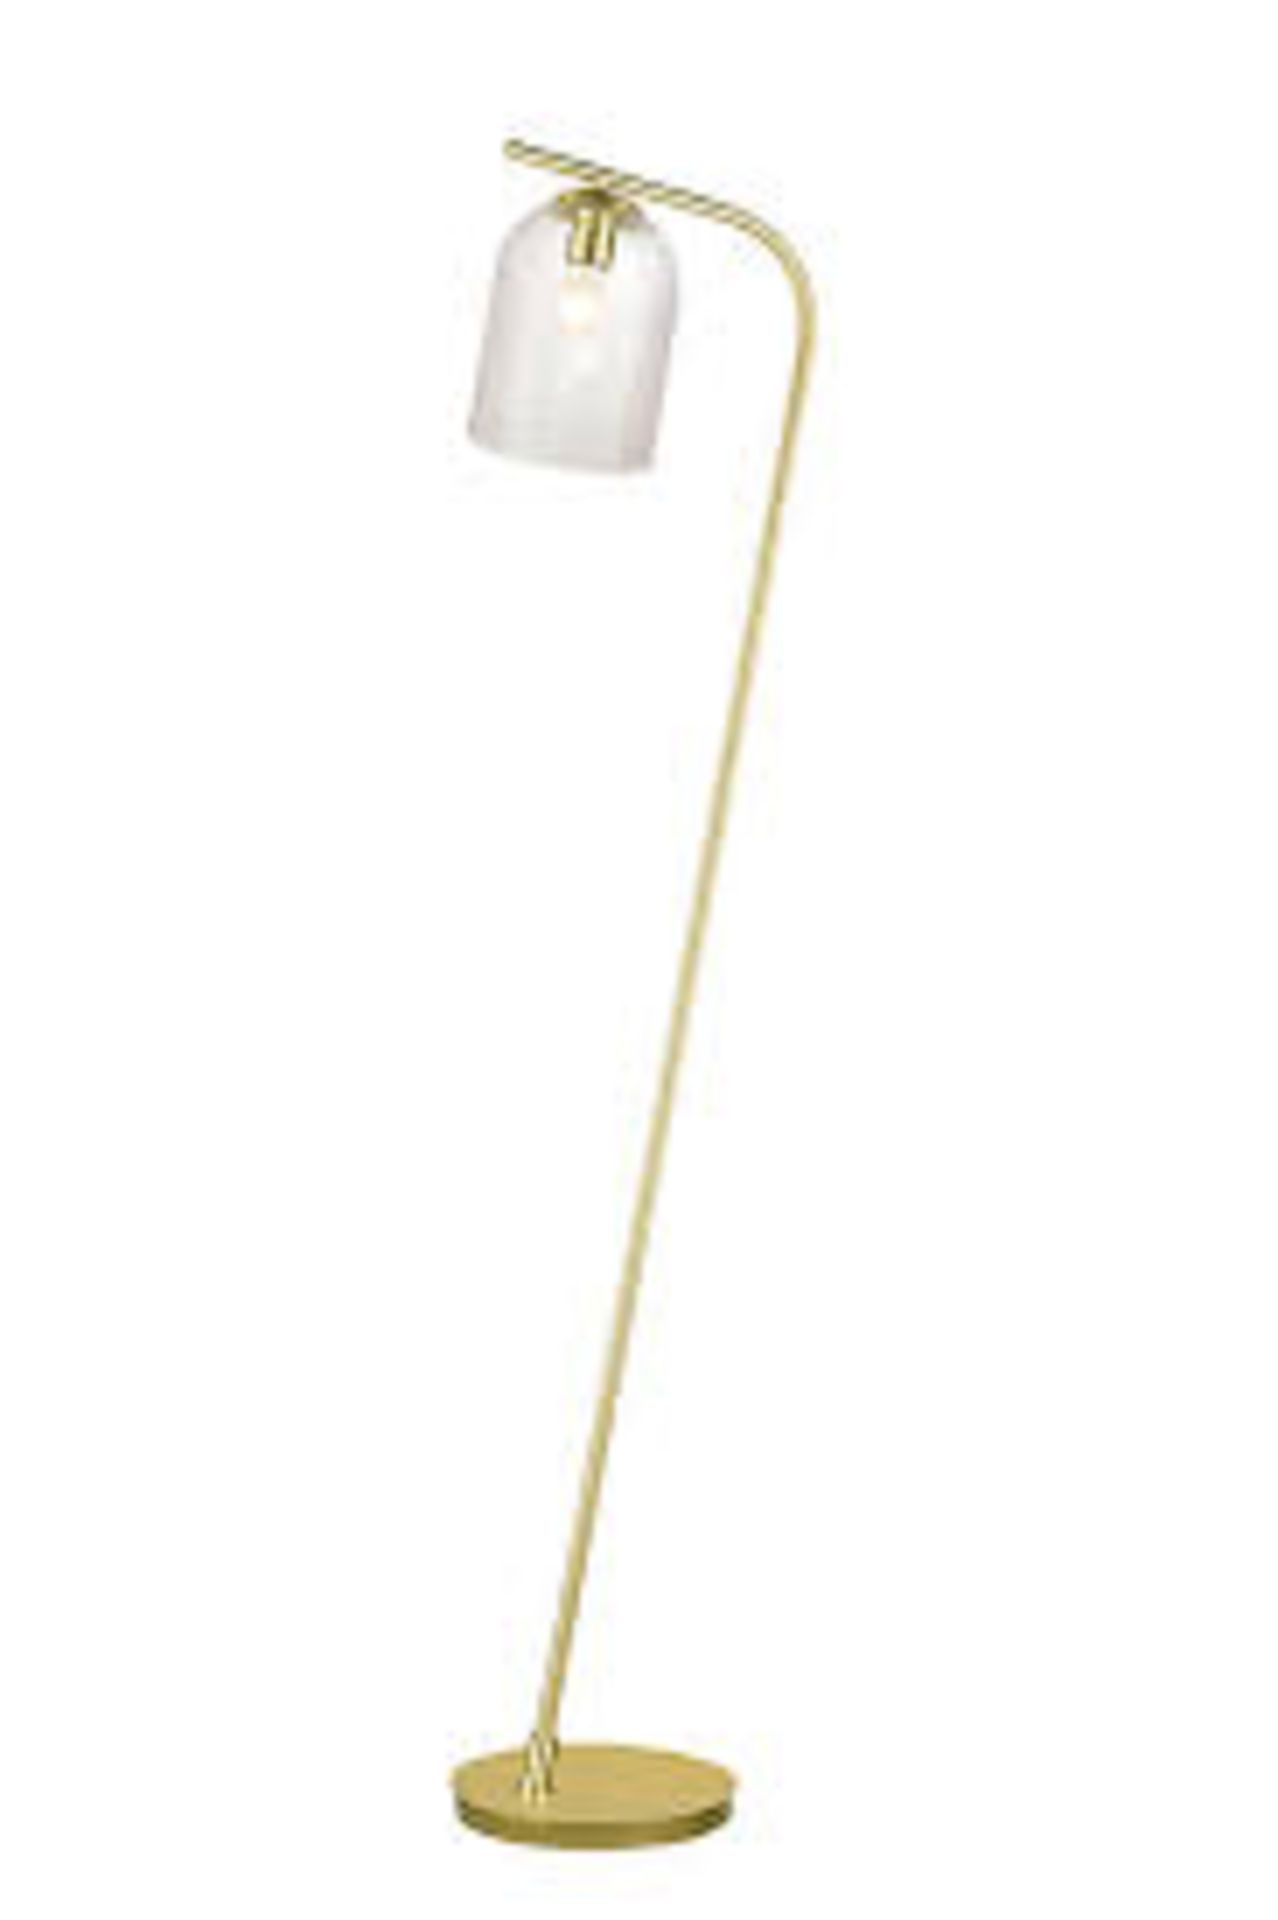 GoodHome Thestias Brass effect Floor light. - SR23. This brushed brass effect floor lamp has a